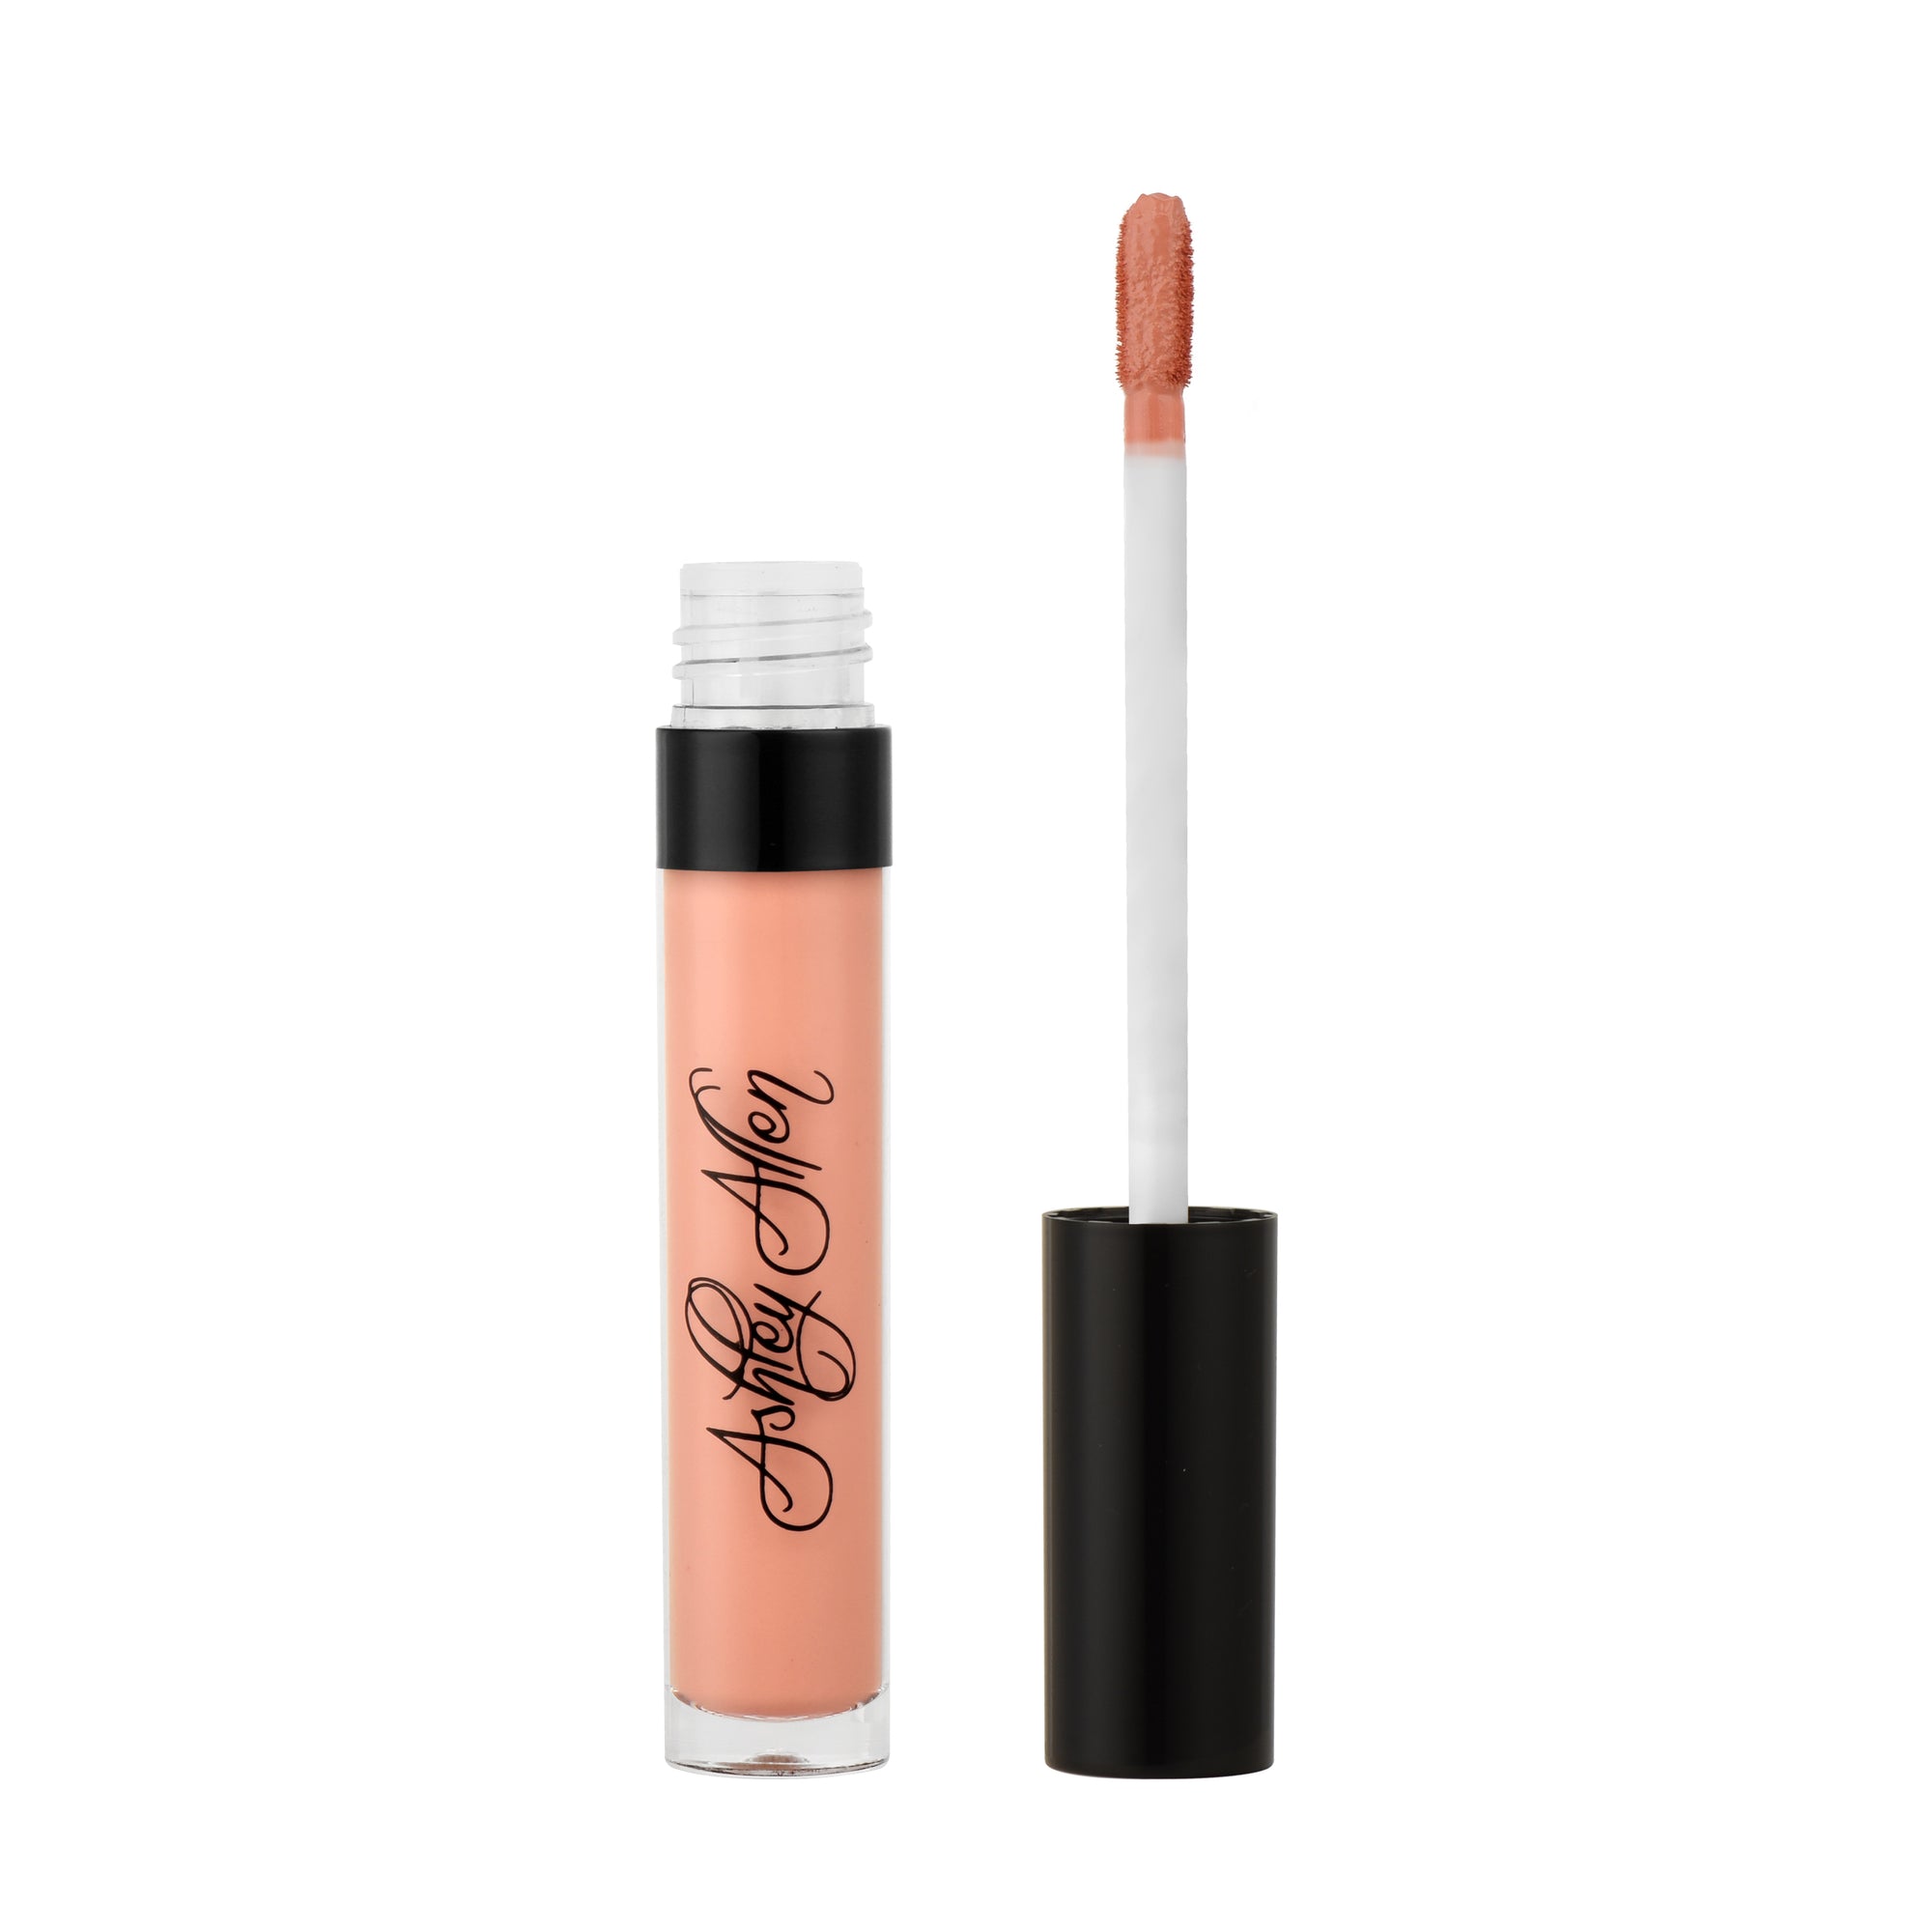 Matte Lip - N033 (50%OFF) will be $12.50 activated at checkout